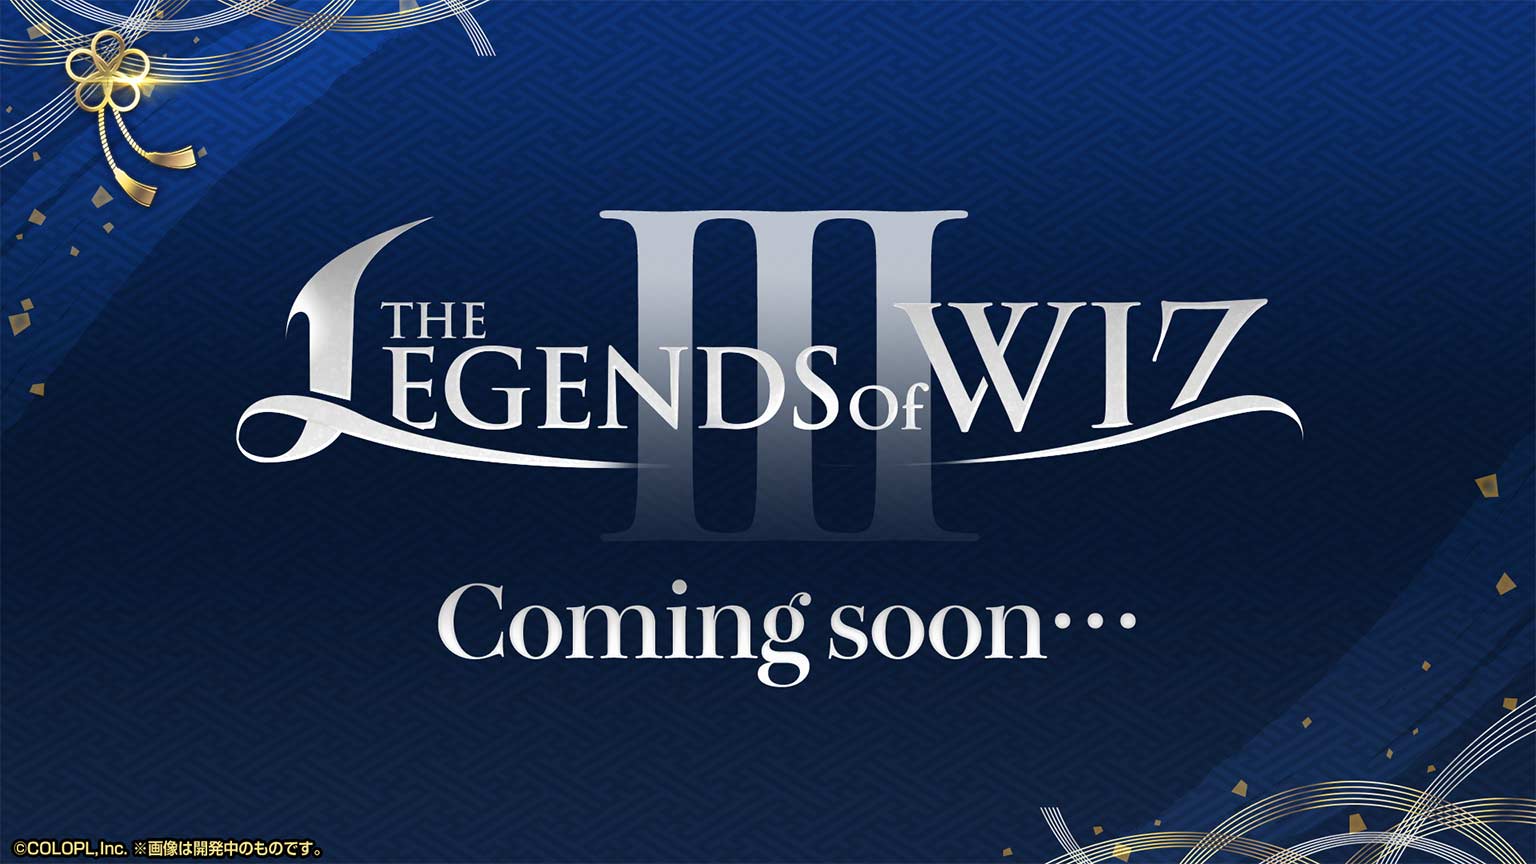 THE LEGENDS of WIZ Coming Soon